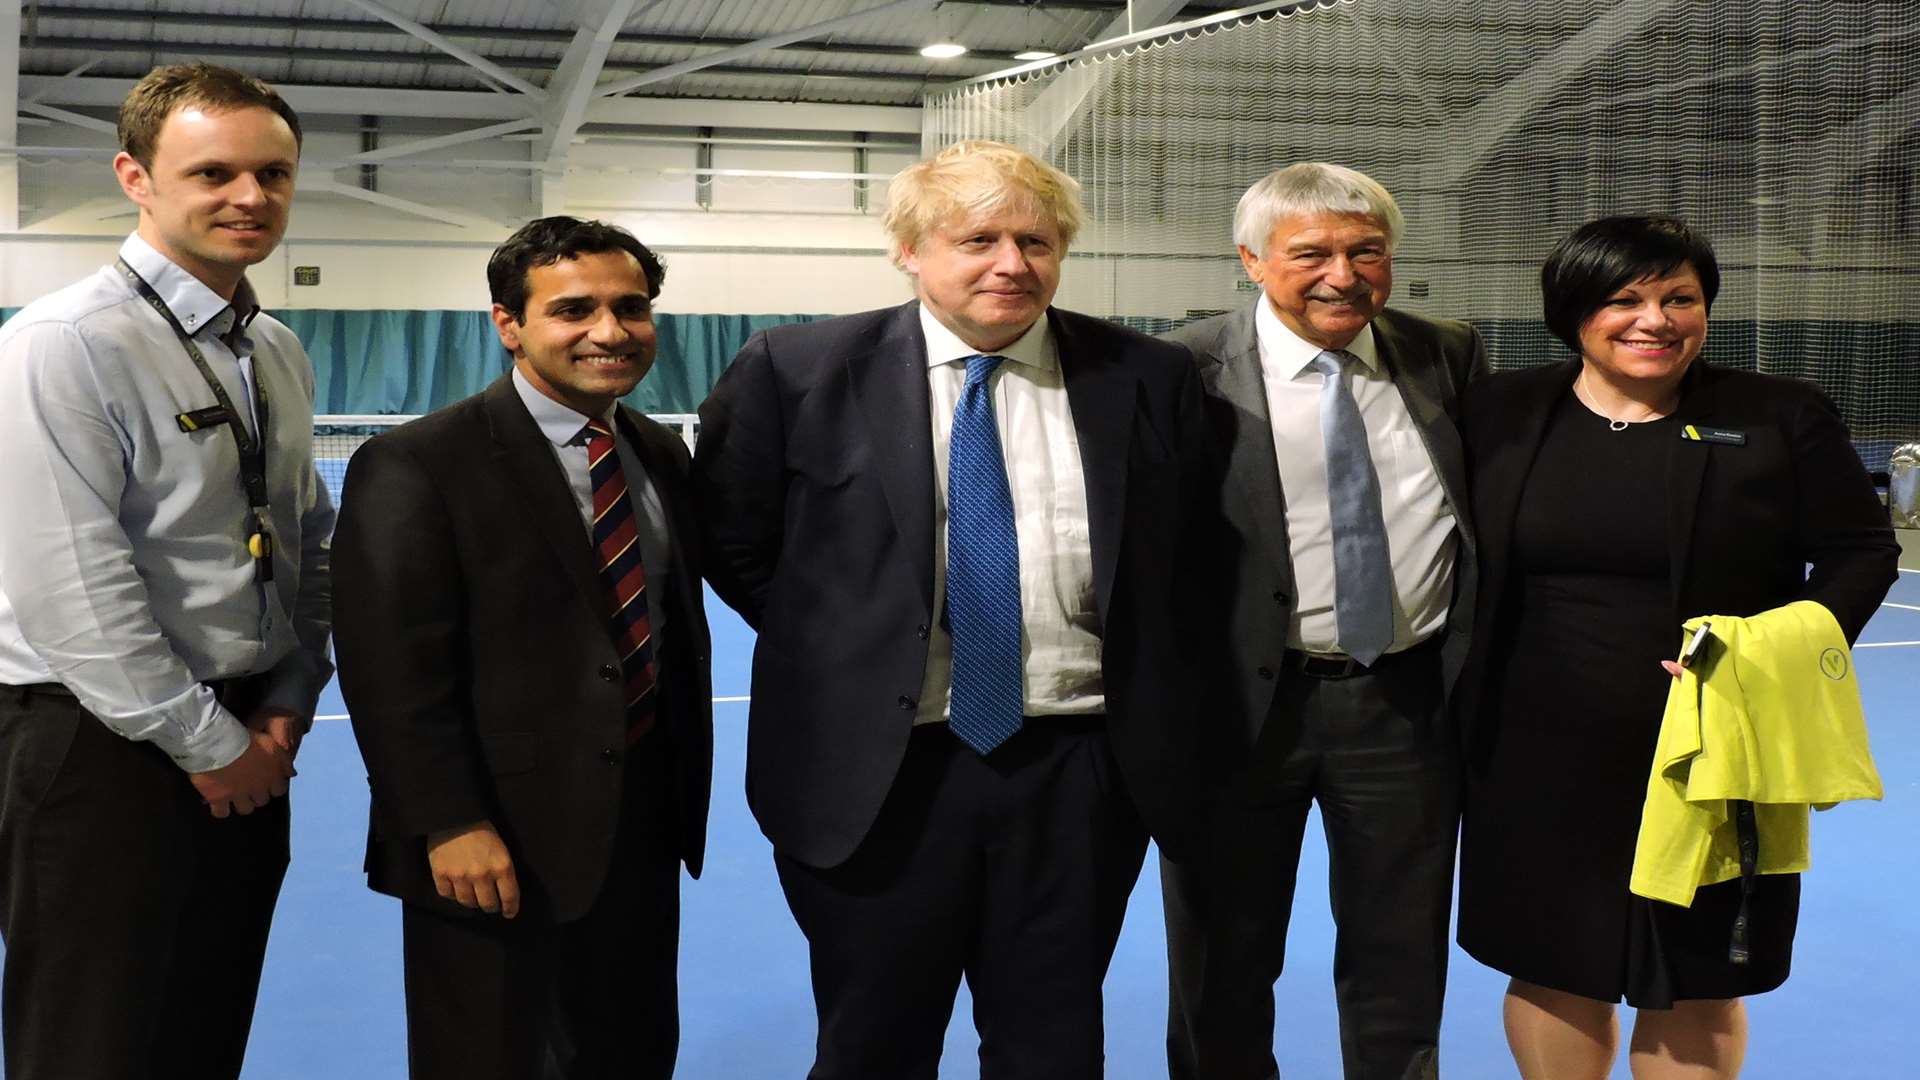 Staff at Avenue Tennis with MP Rehman Chishti, Boris Johnson and owner of the facility Colin Jarvis.